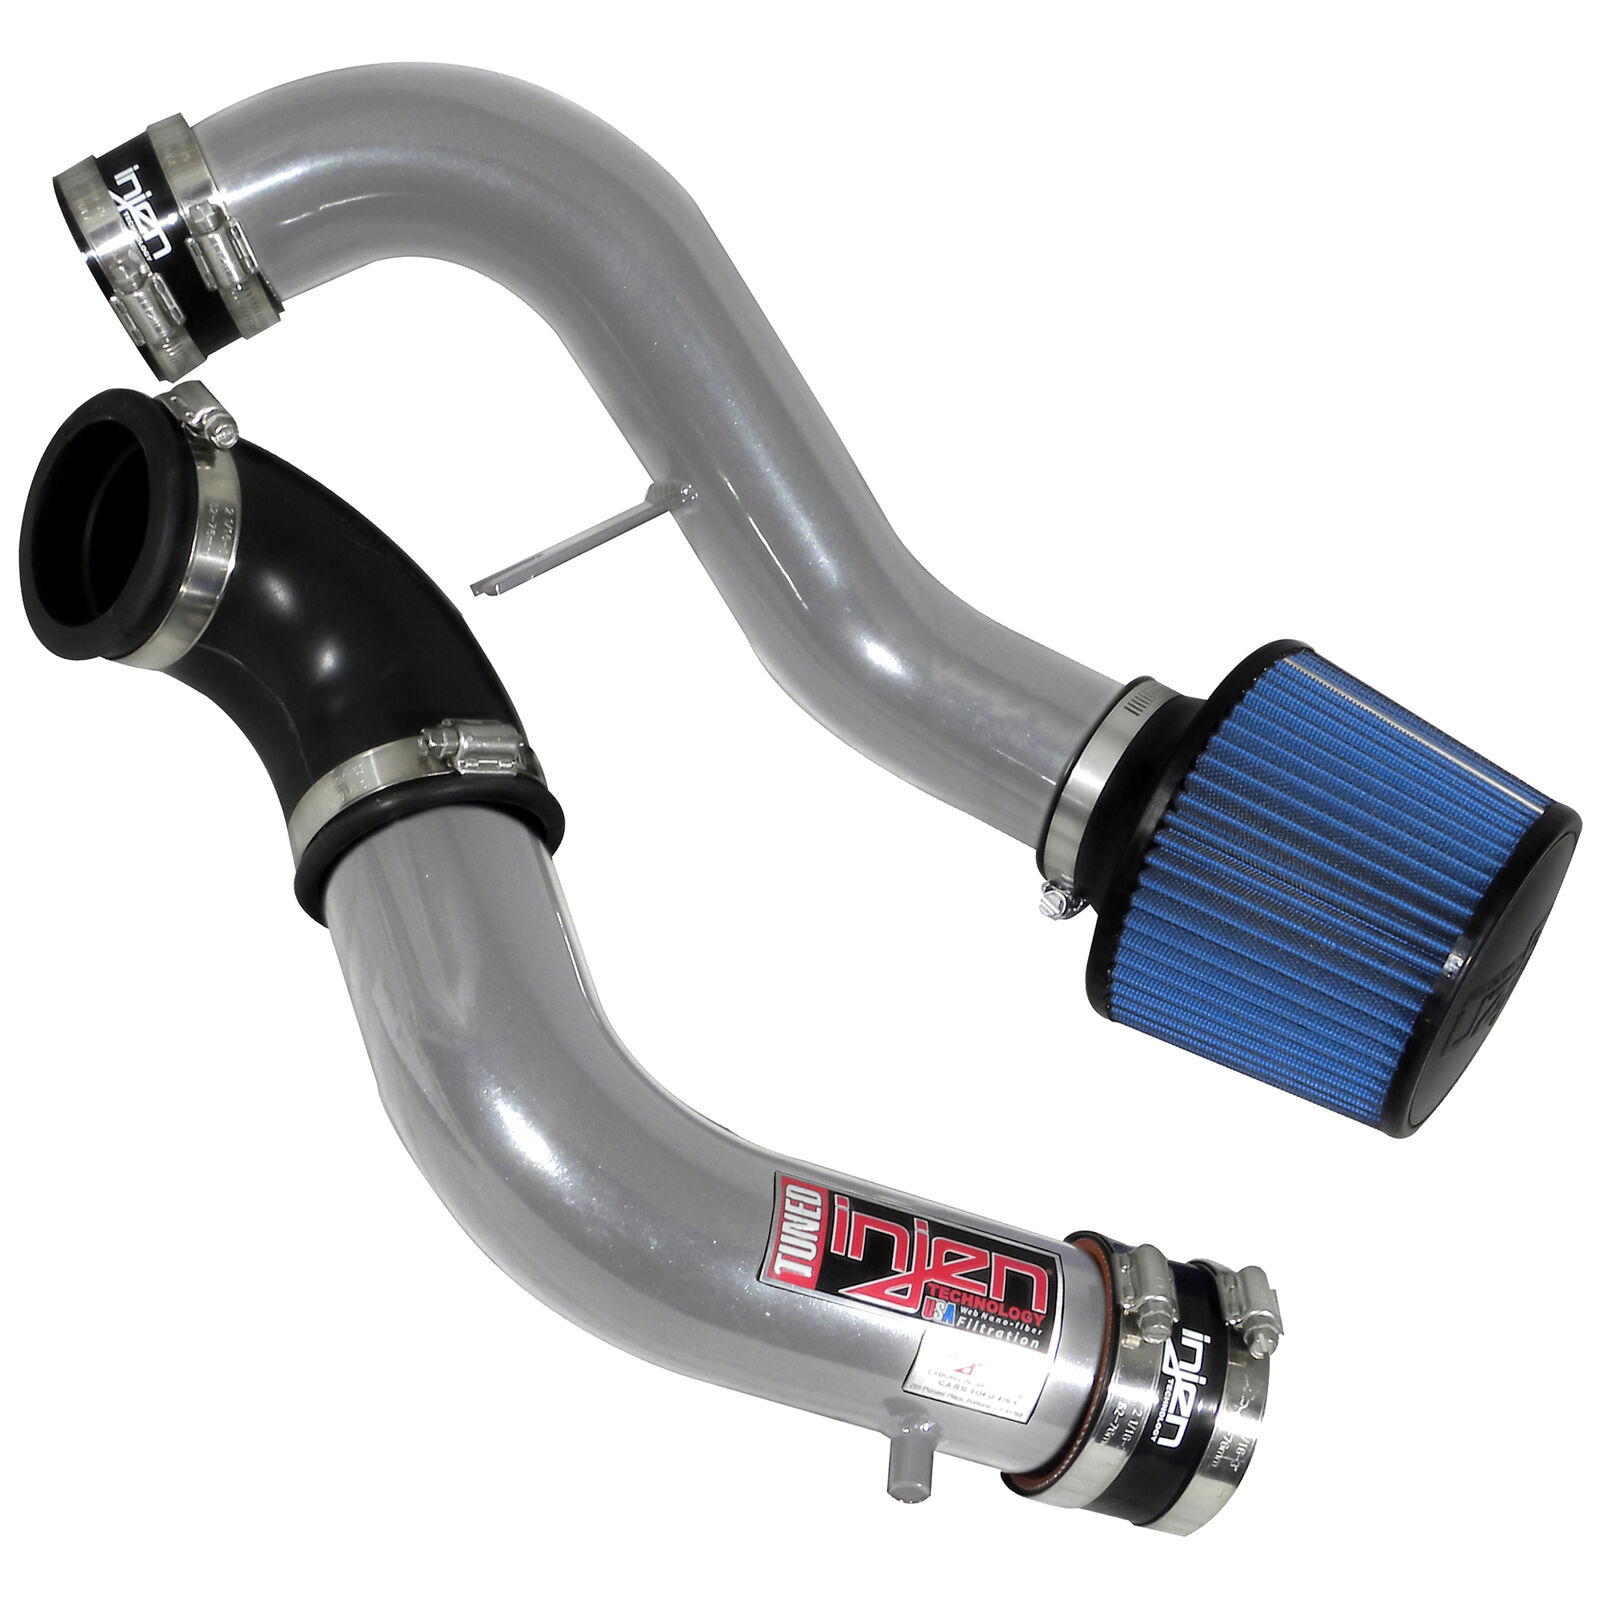 Injen RD6060P Aluminum Cold Air Intake System for 01-03 Mazda Protege 5 MP3 2.0L